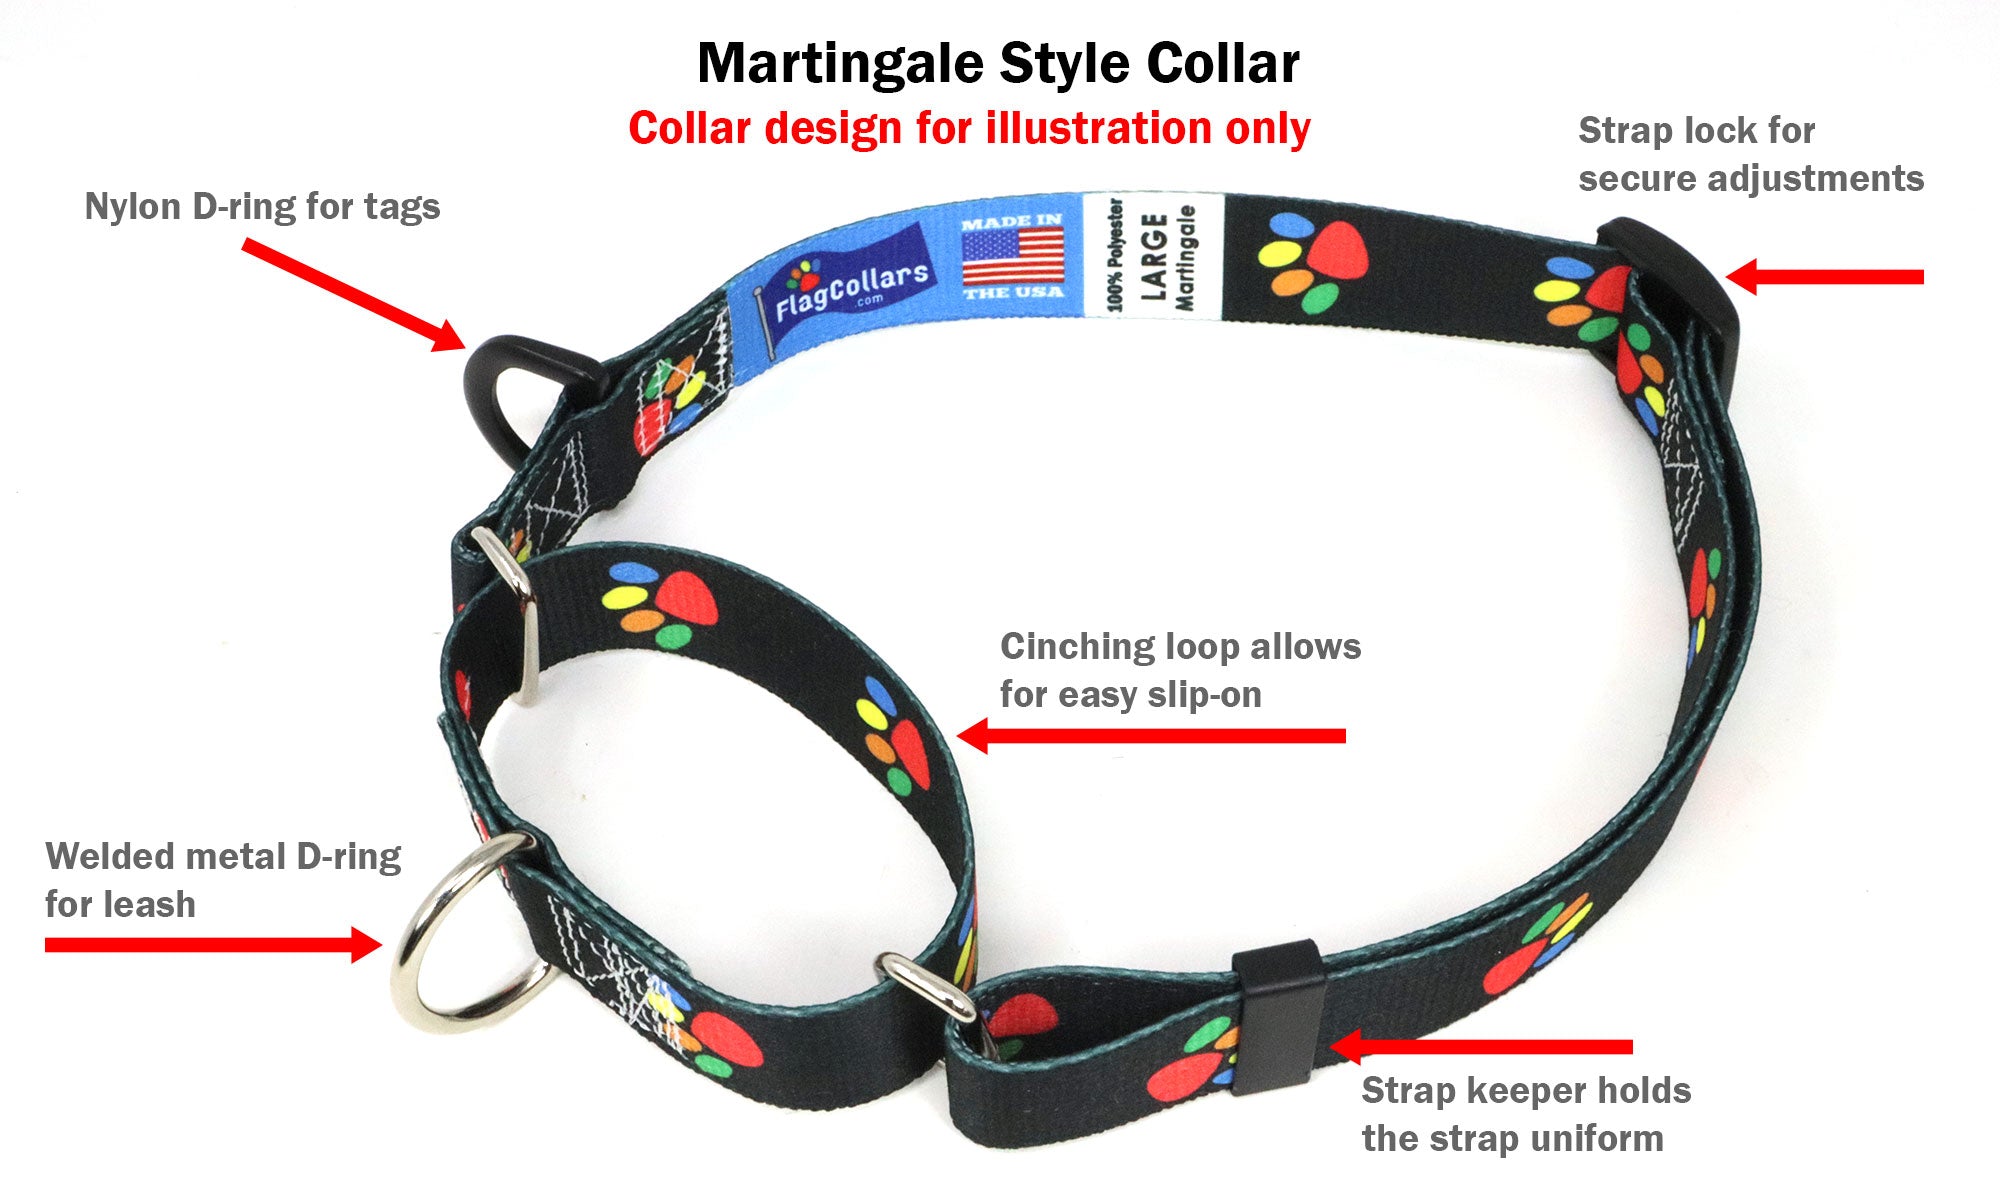 Kazakhstan Dog Collar | Quick Release or Martingale Style | Made in NJ, USA